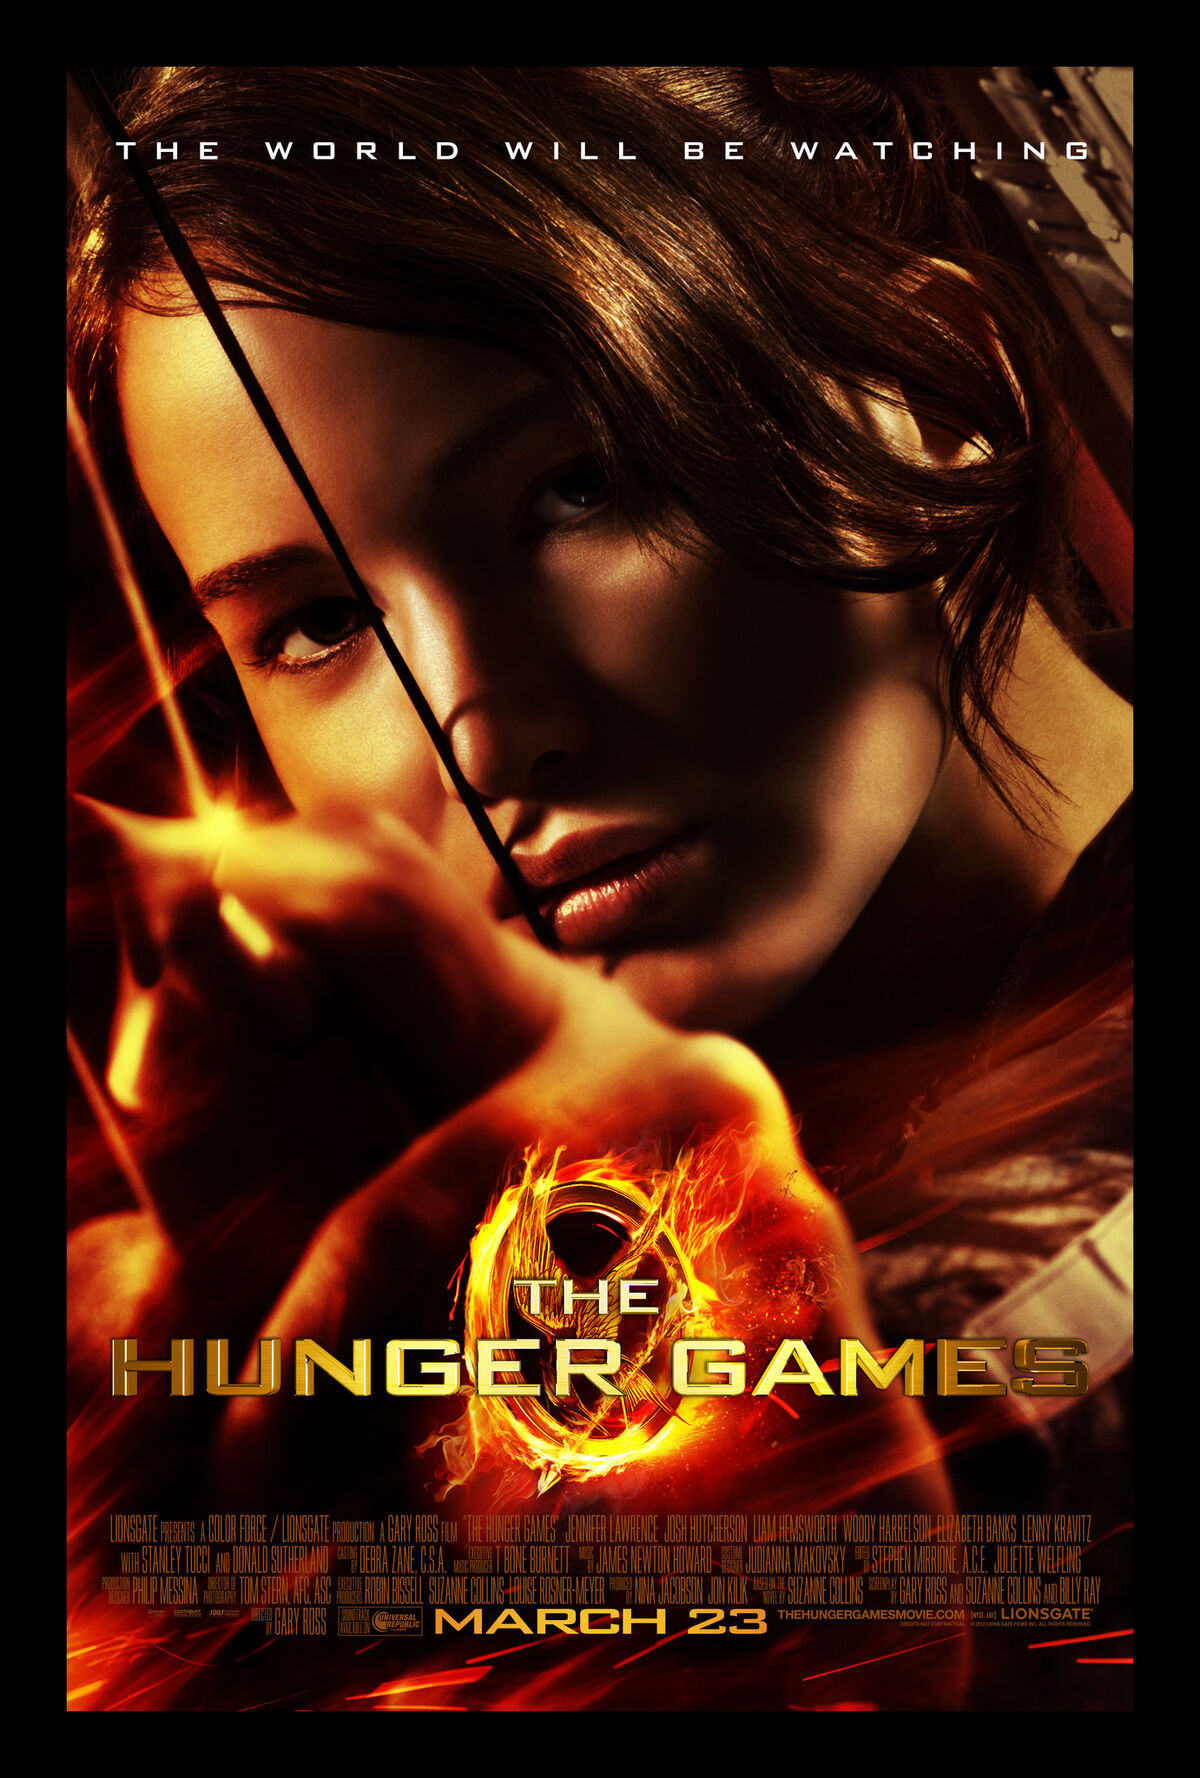 UK Tributes: Watch 'The Hunger Games' on Lionsgate LIVE - A Free Night At  The Movies! - The Hunger Games News - Panem Propaganda